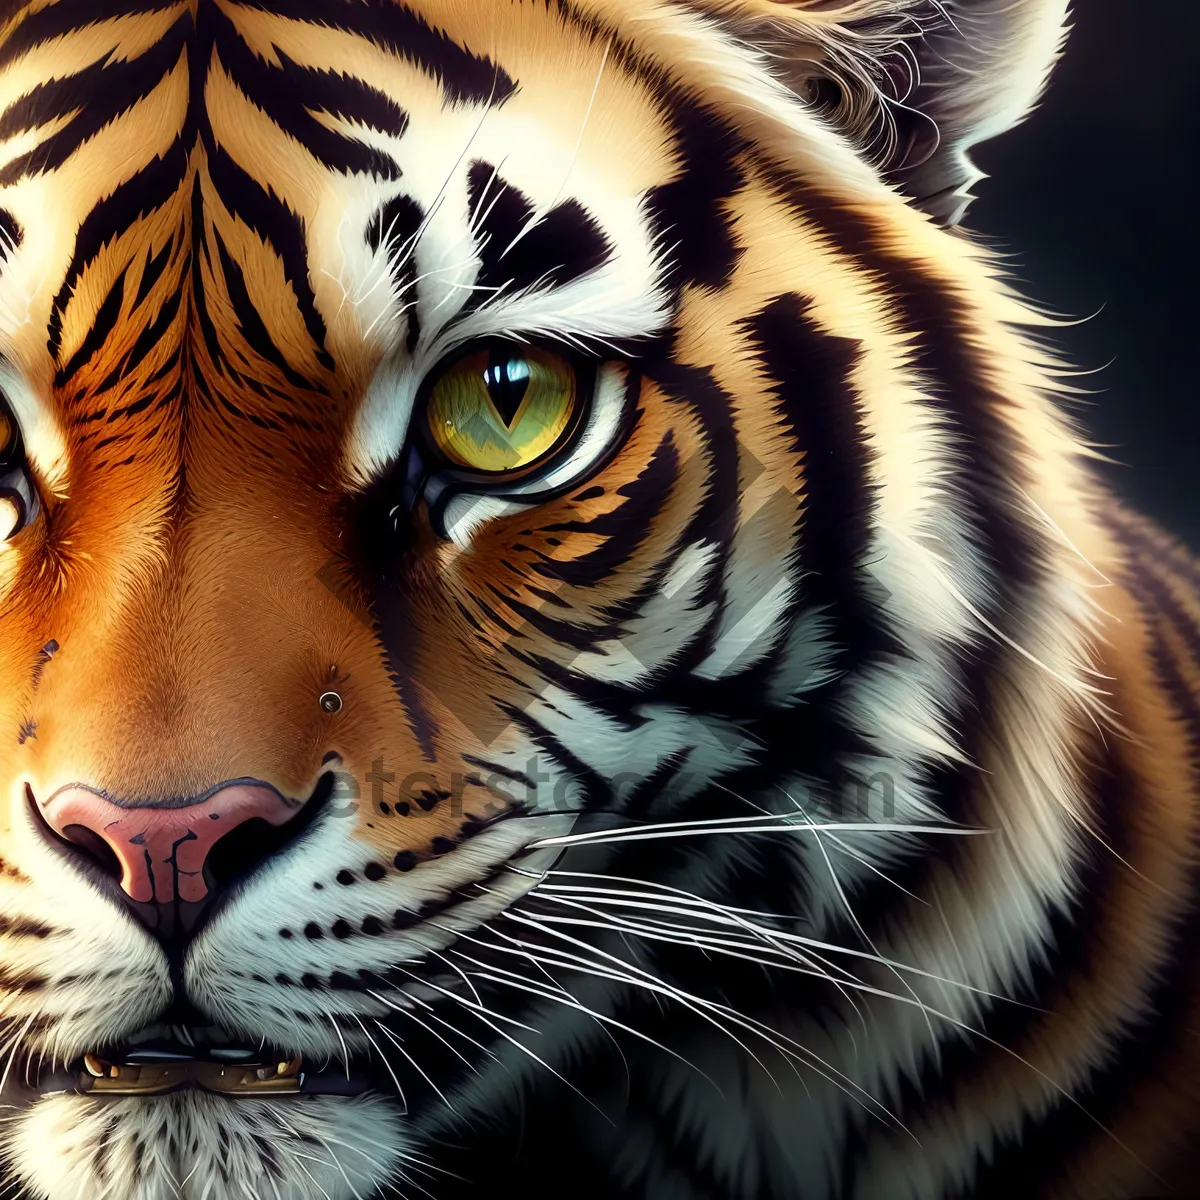 Picture of Striking Tiger - Majestic Wild Predator with Bold Stripes